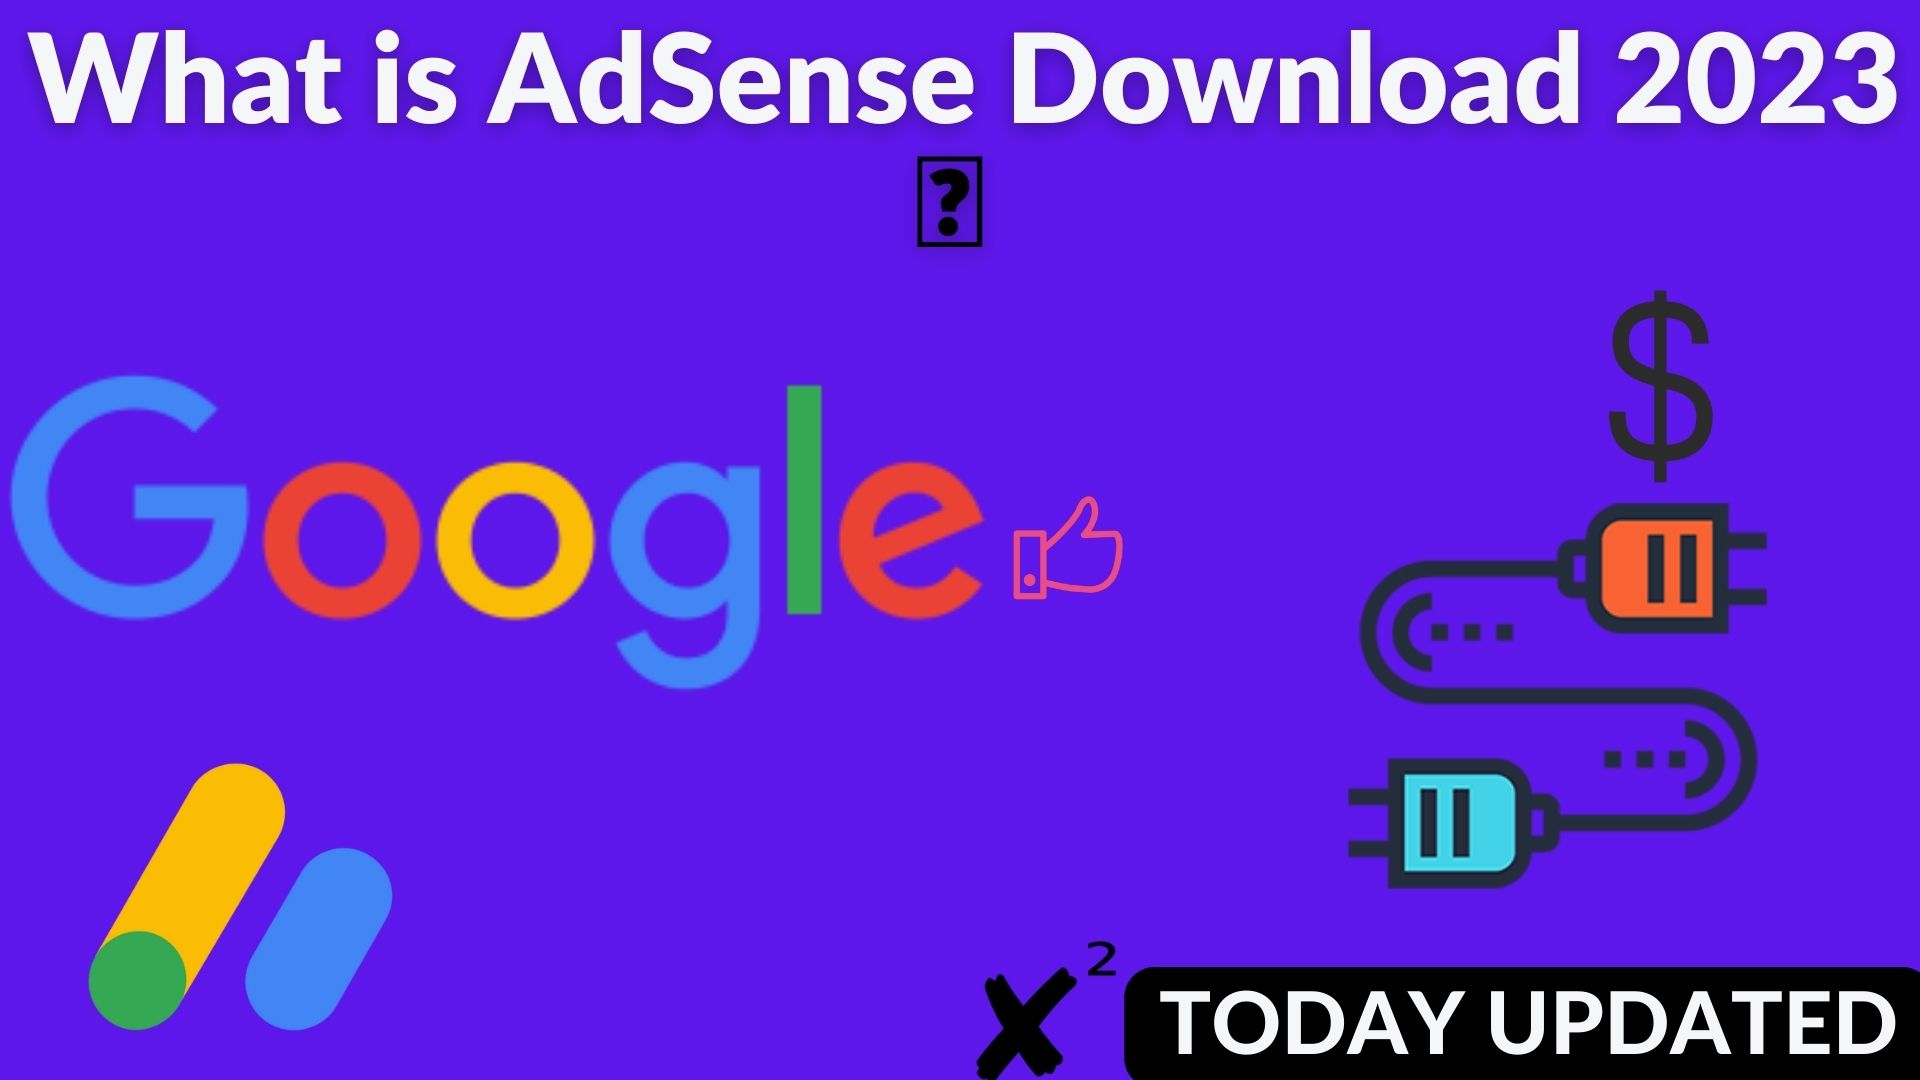 What is adsense download 2023